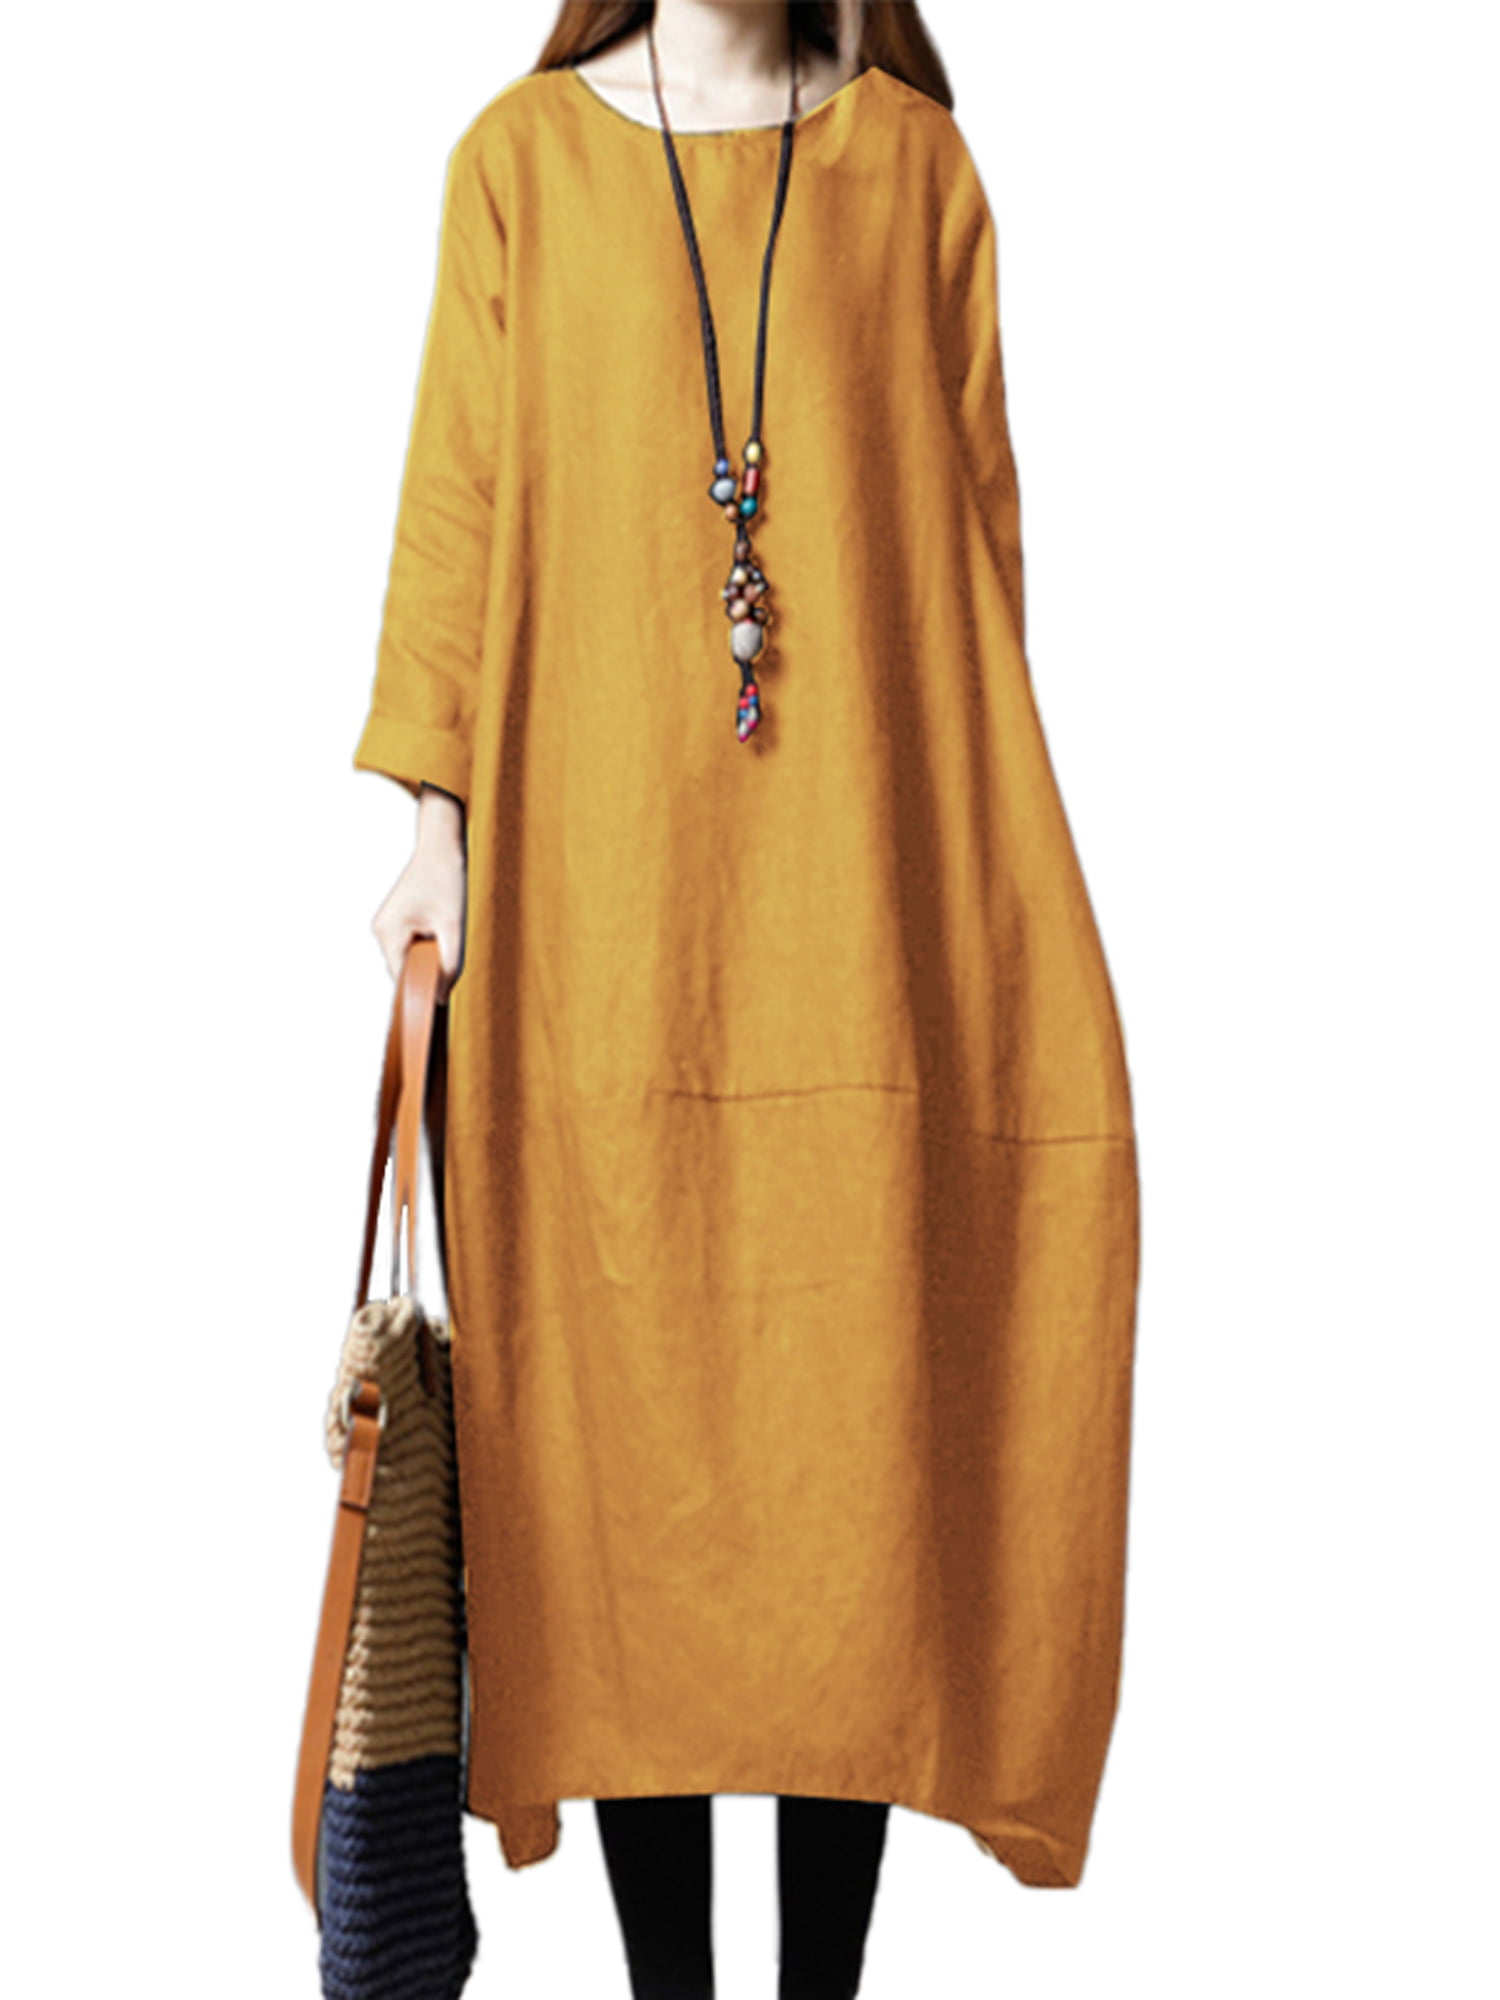 Women Baggy House Dress Casual Solid Loose Long Dress O-Neck Tank Sleeve Dress Sundress with Pocket Plus Size S-5XL